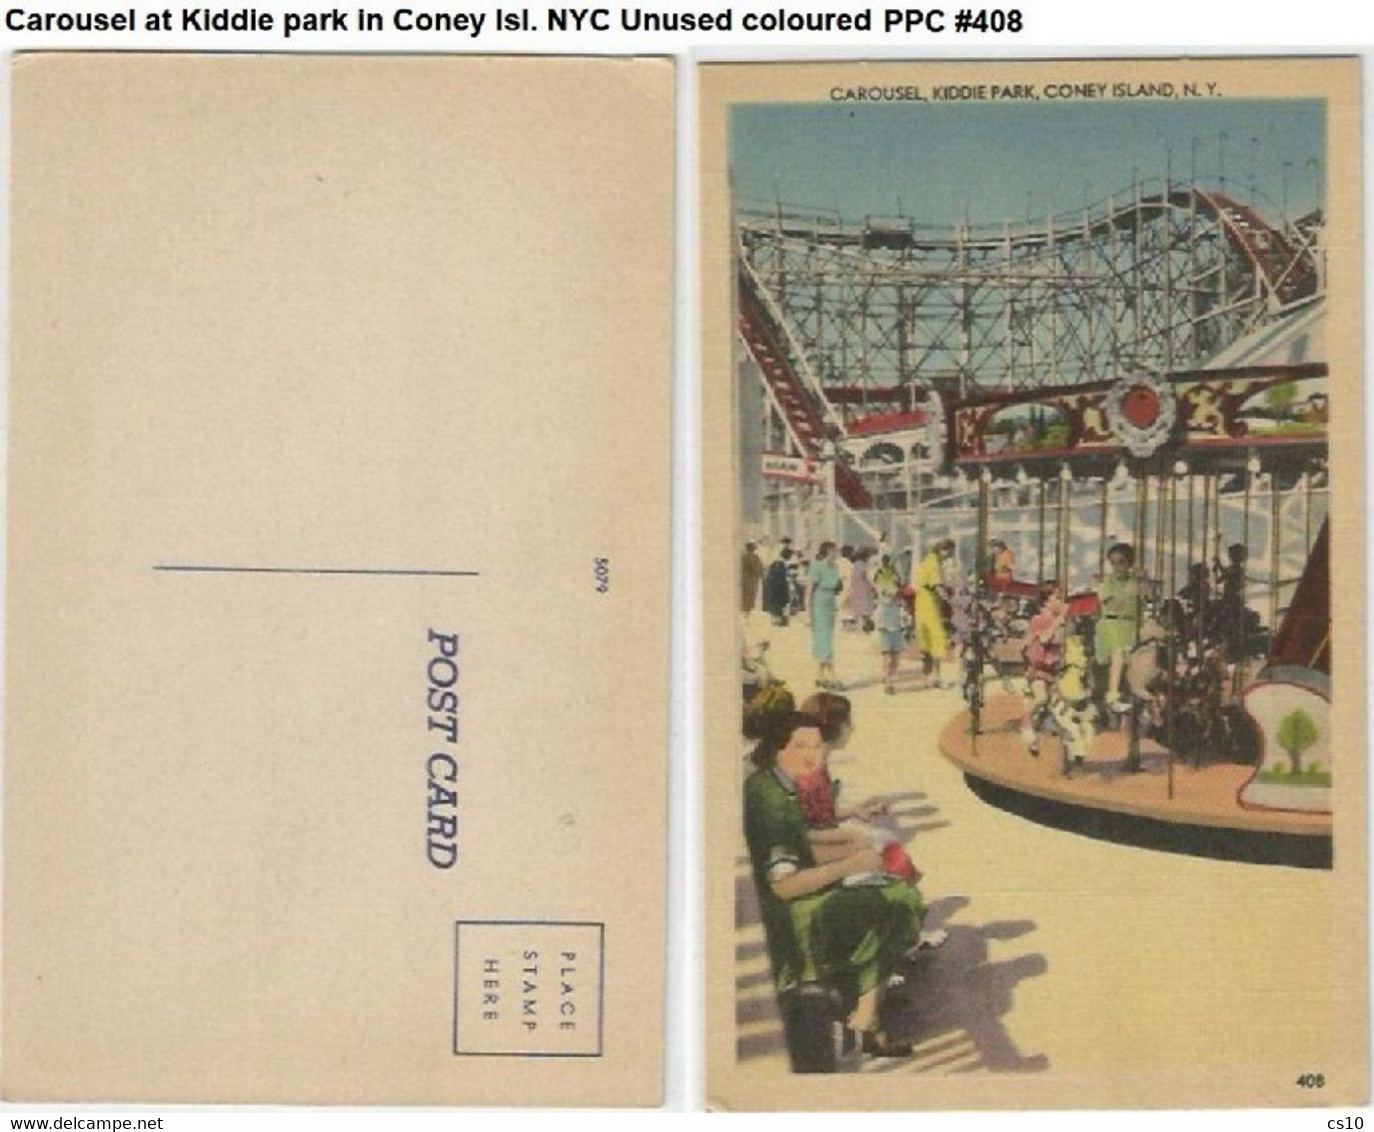 Carousel At Kiddie Park In Coney Isl. NYC Unused Coloured PPC #408 - Parks & Gardens